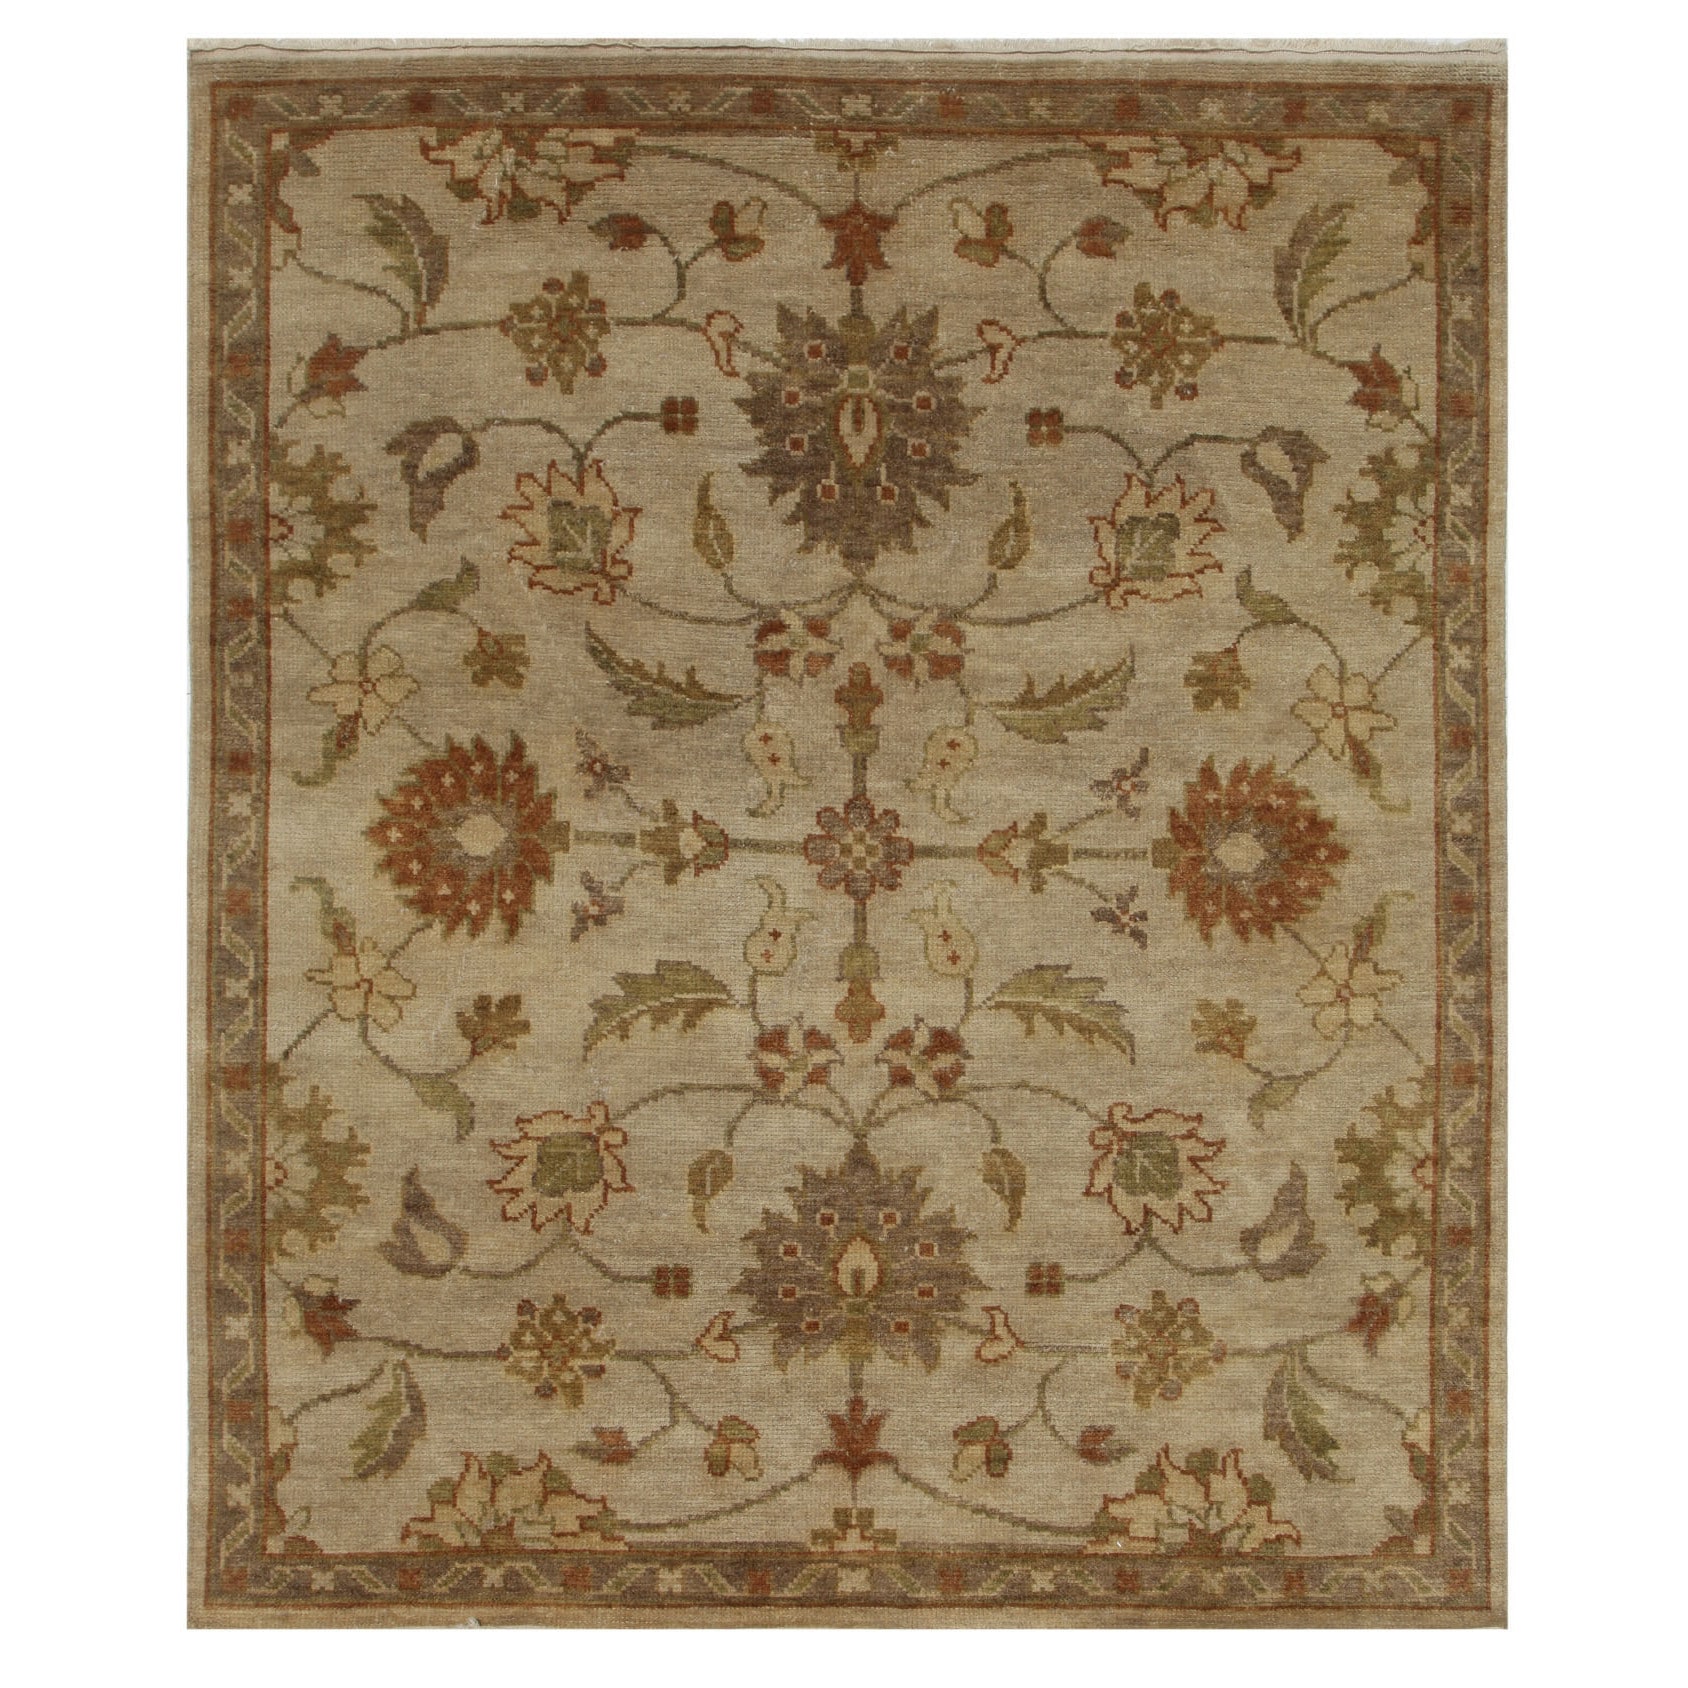 Hand knotted Gold Floral Pattern Wool Rug (8 X 10)